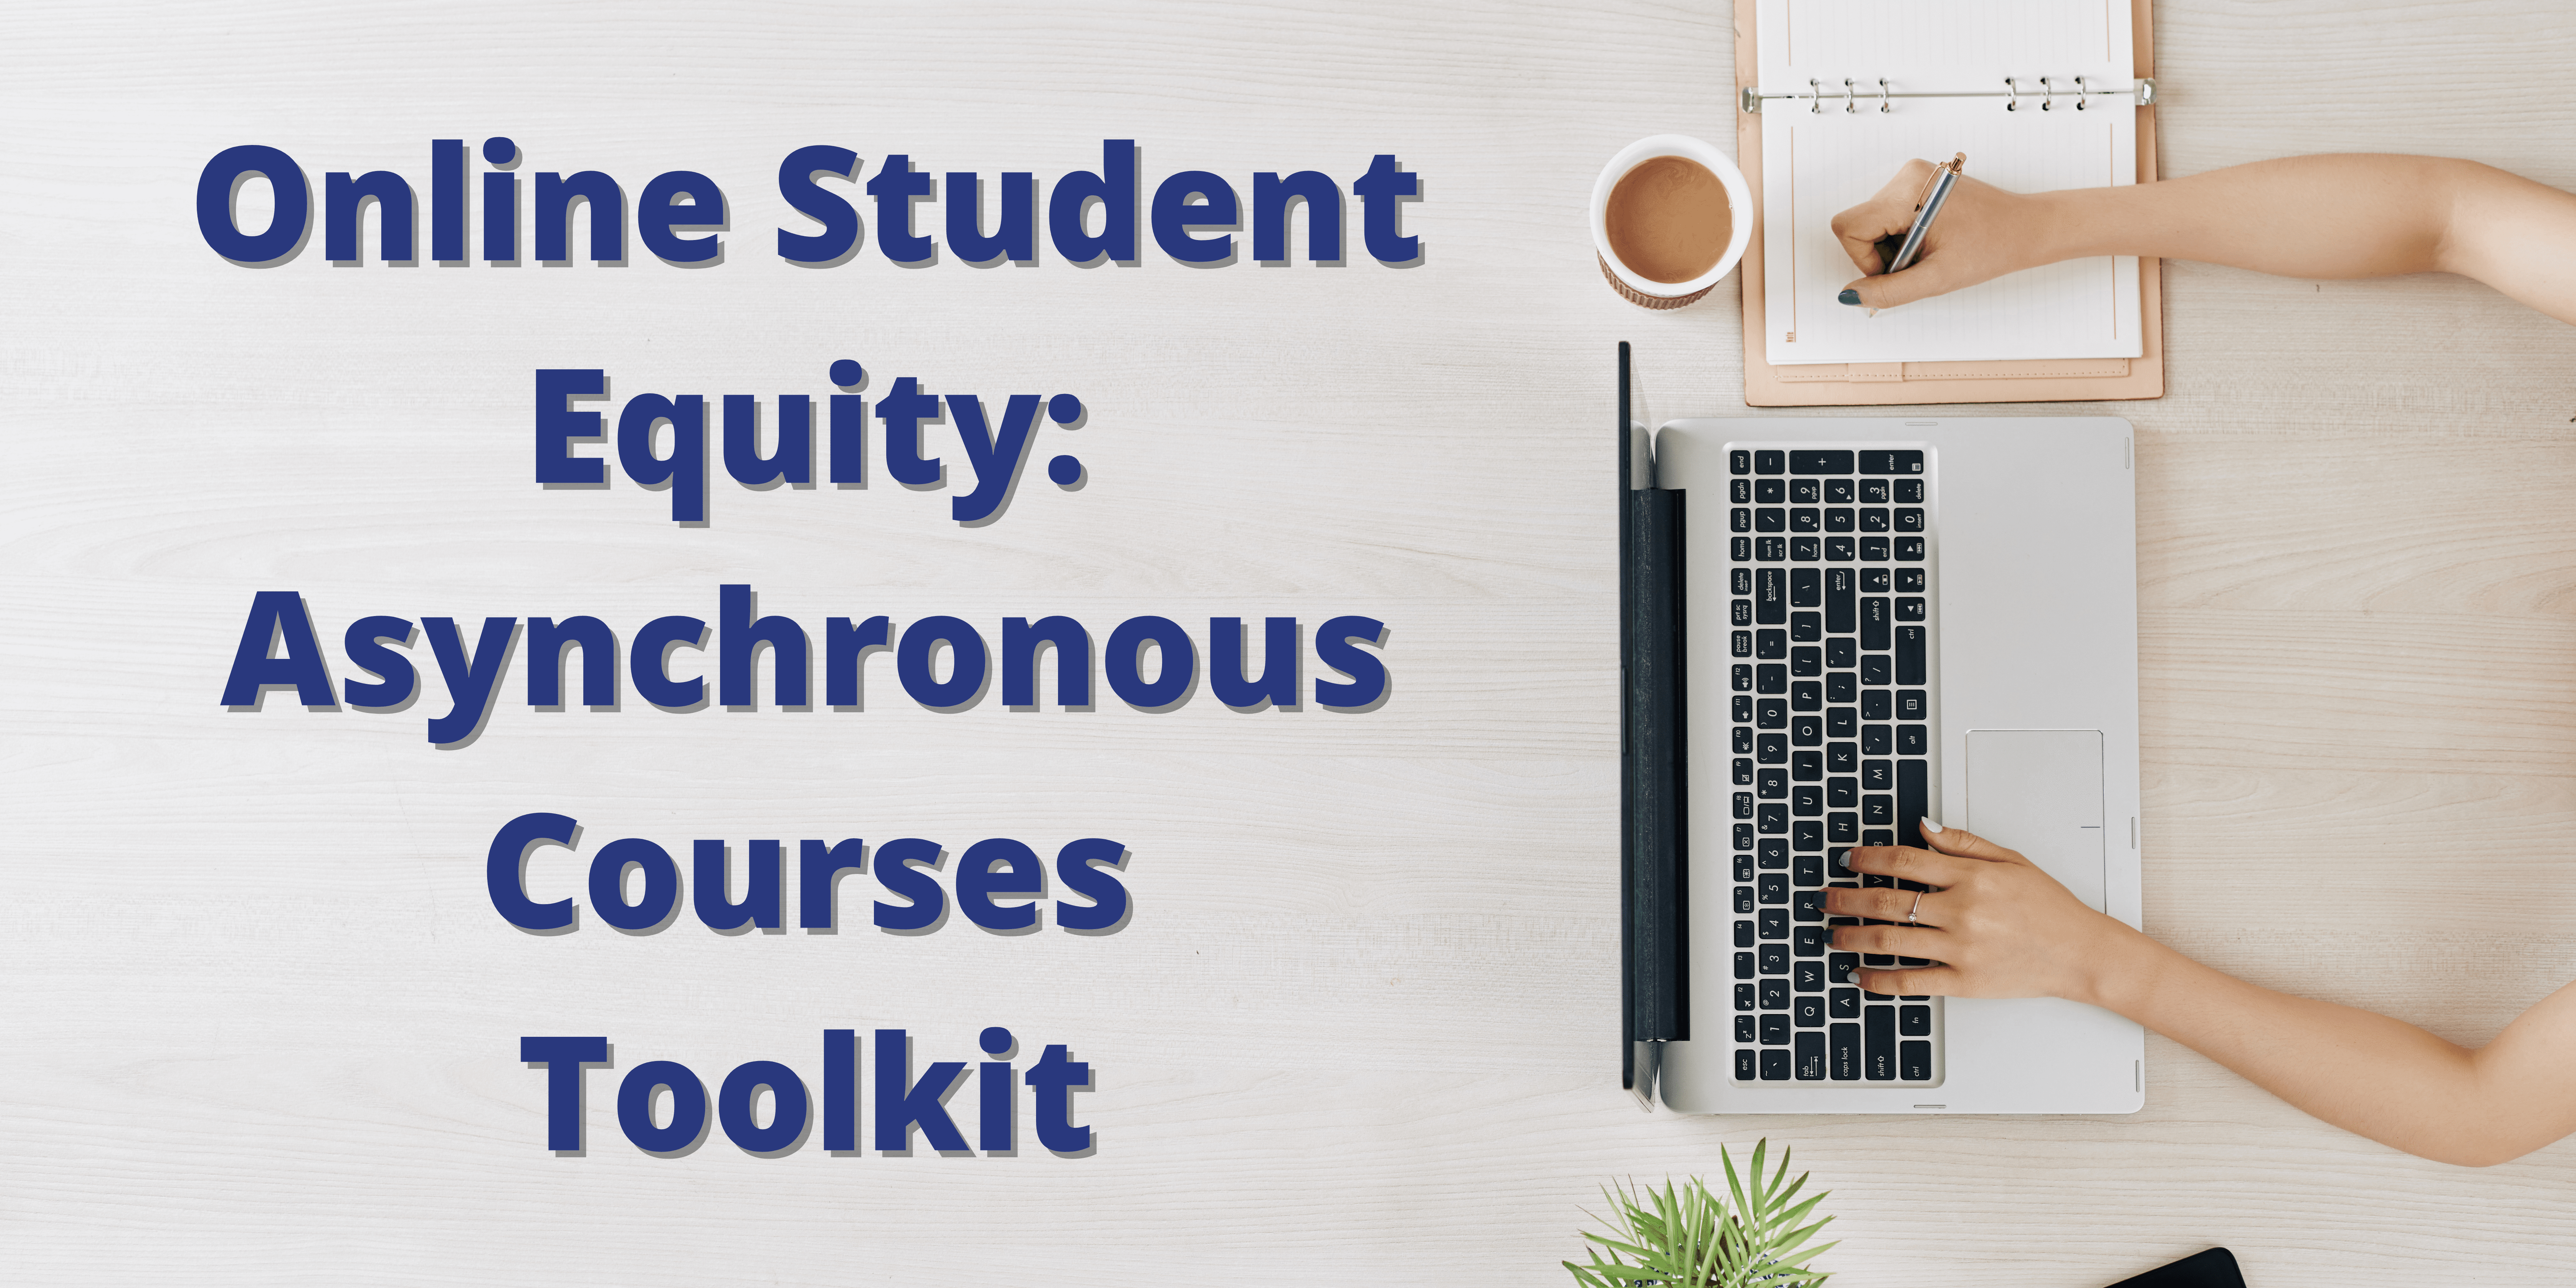 Online Student Equity: Asynchronous Courses Toolkit